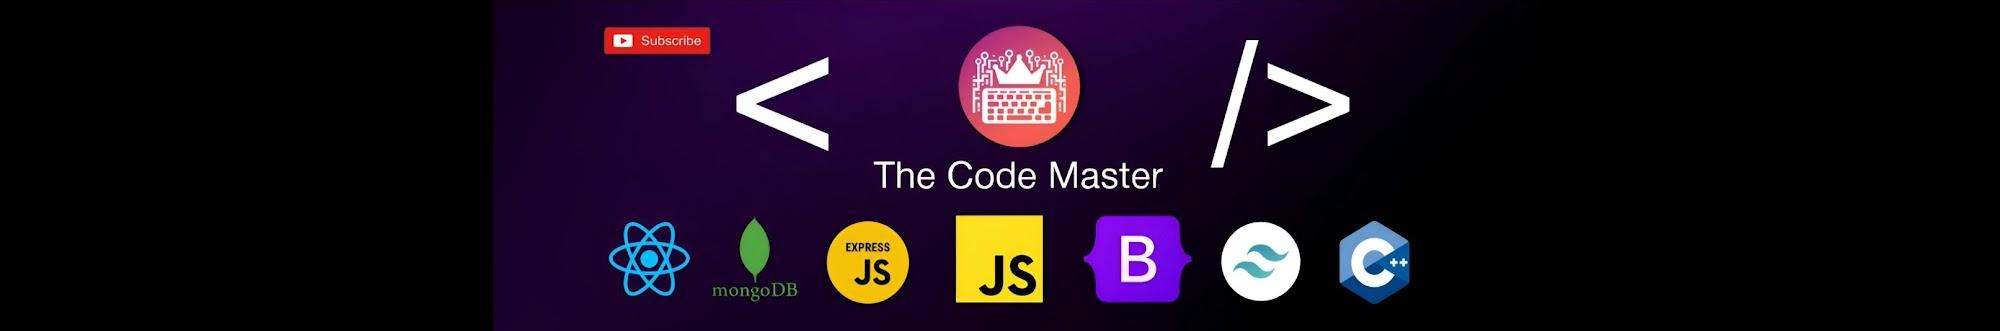 The Code Master